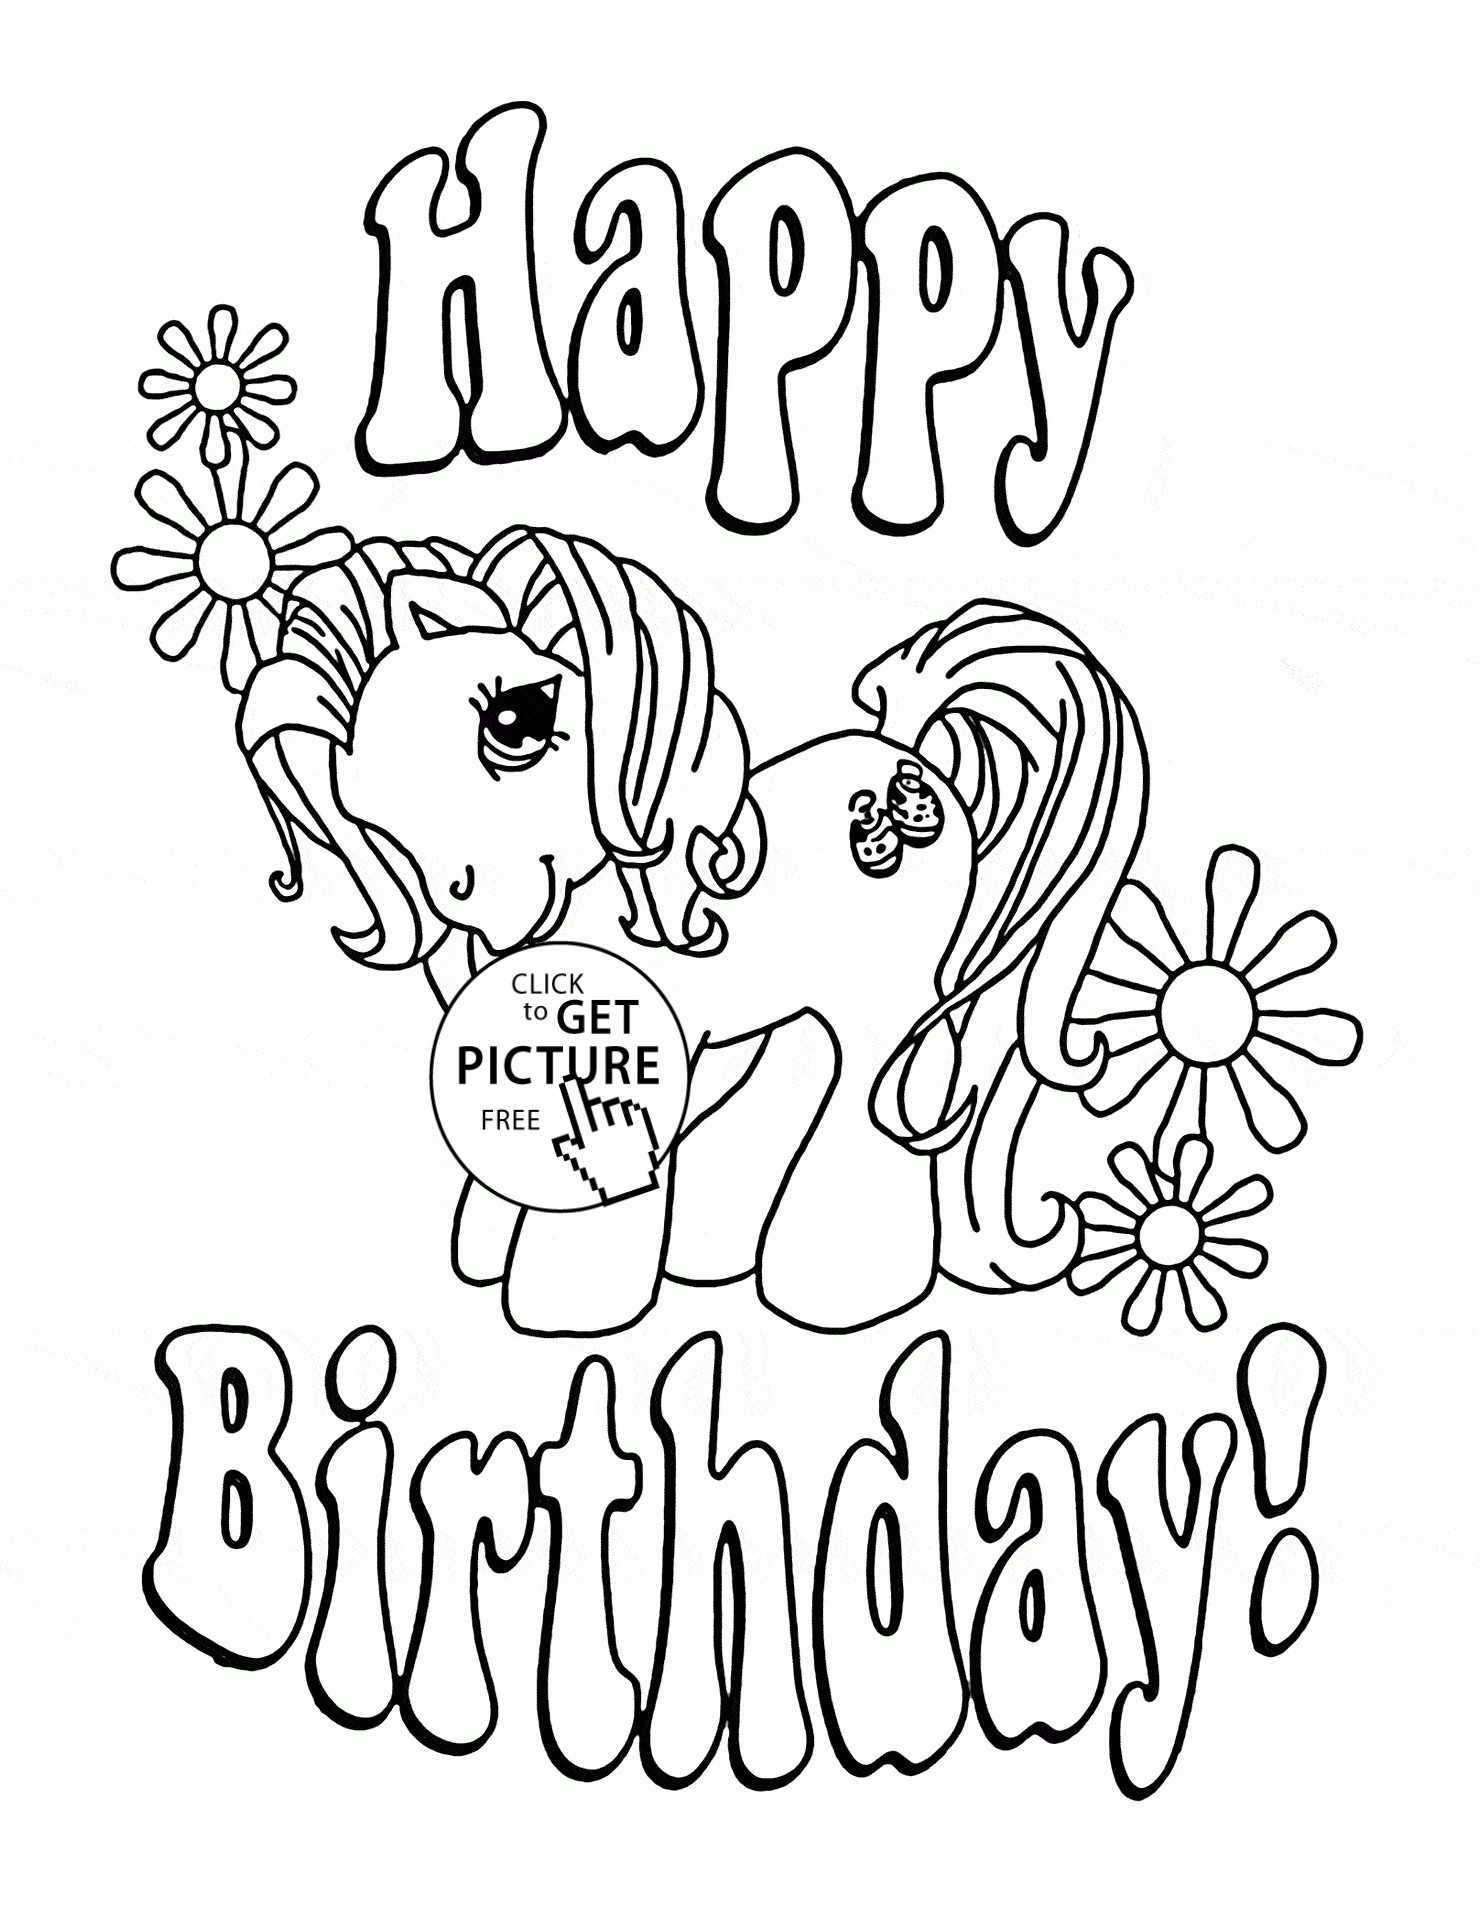 565 Cute Birthday Coloring Pages For Grandpa for Kids